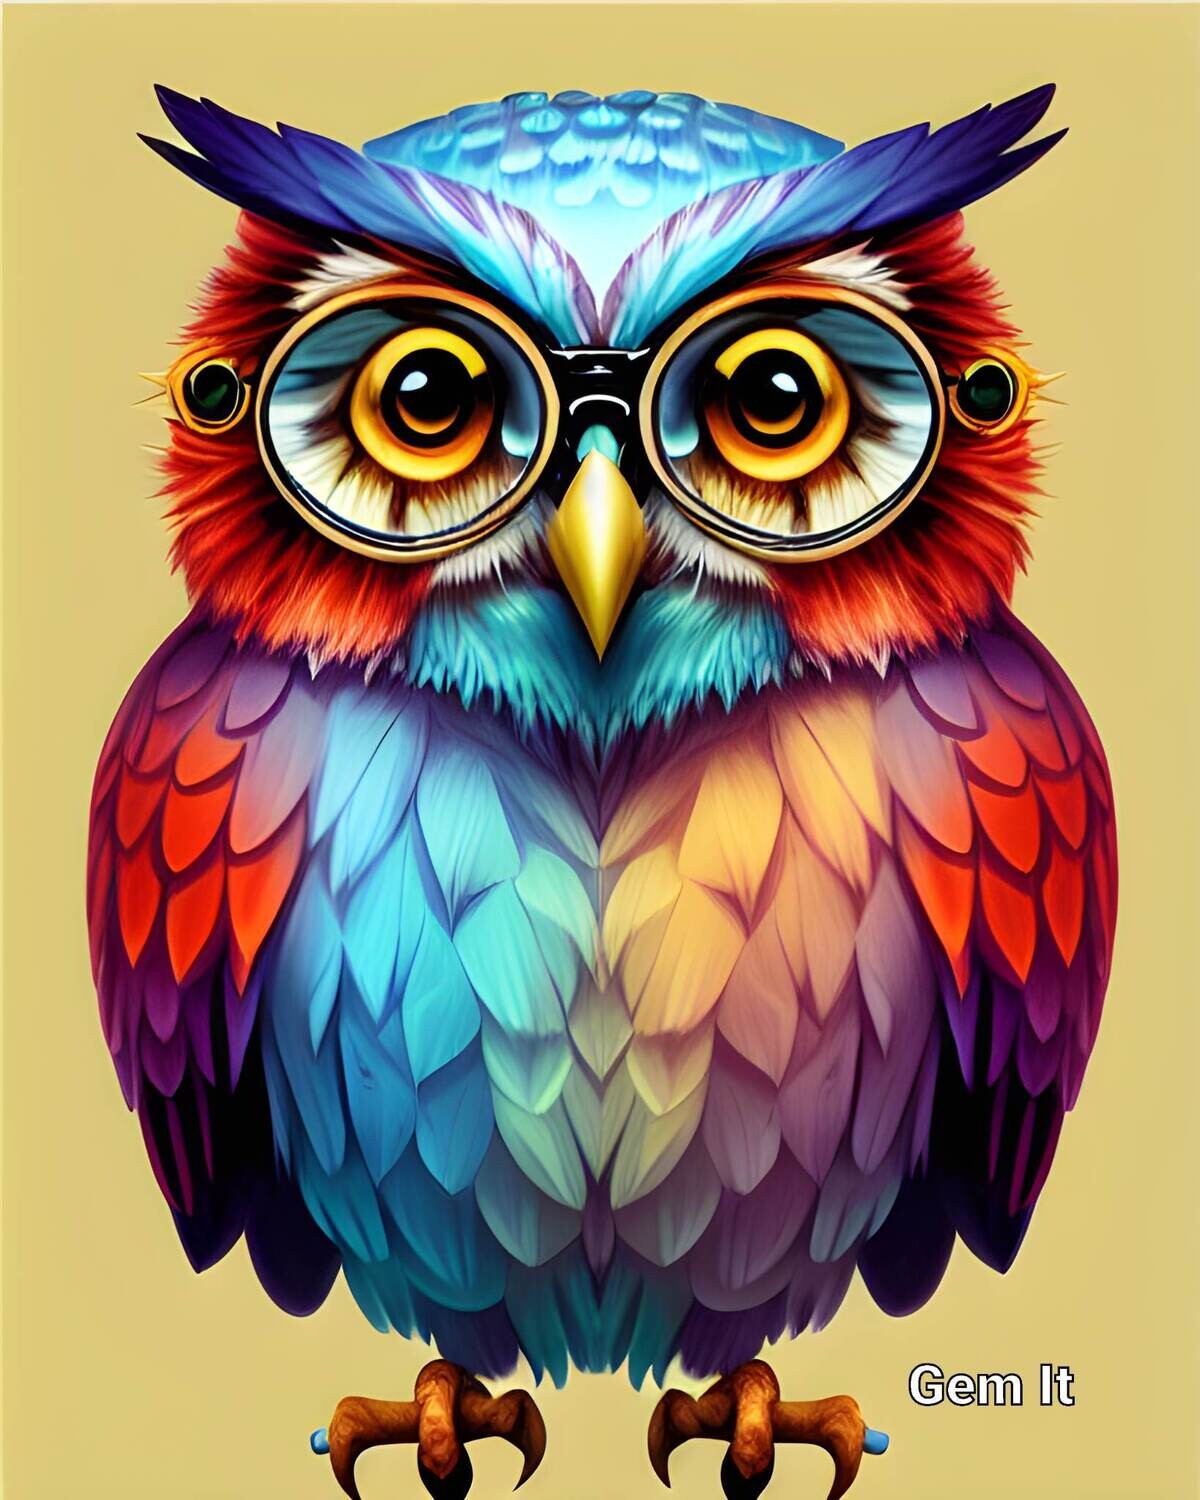 Wise Owl 1 - Specially ordered for you. Delivery is approximately 4 - 6 weeks.